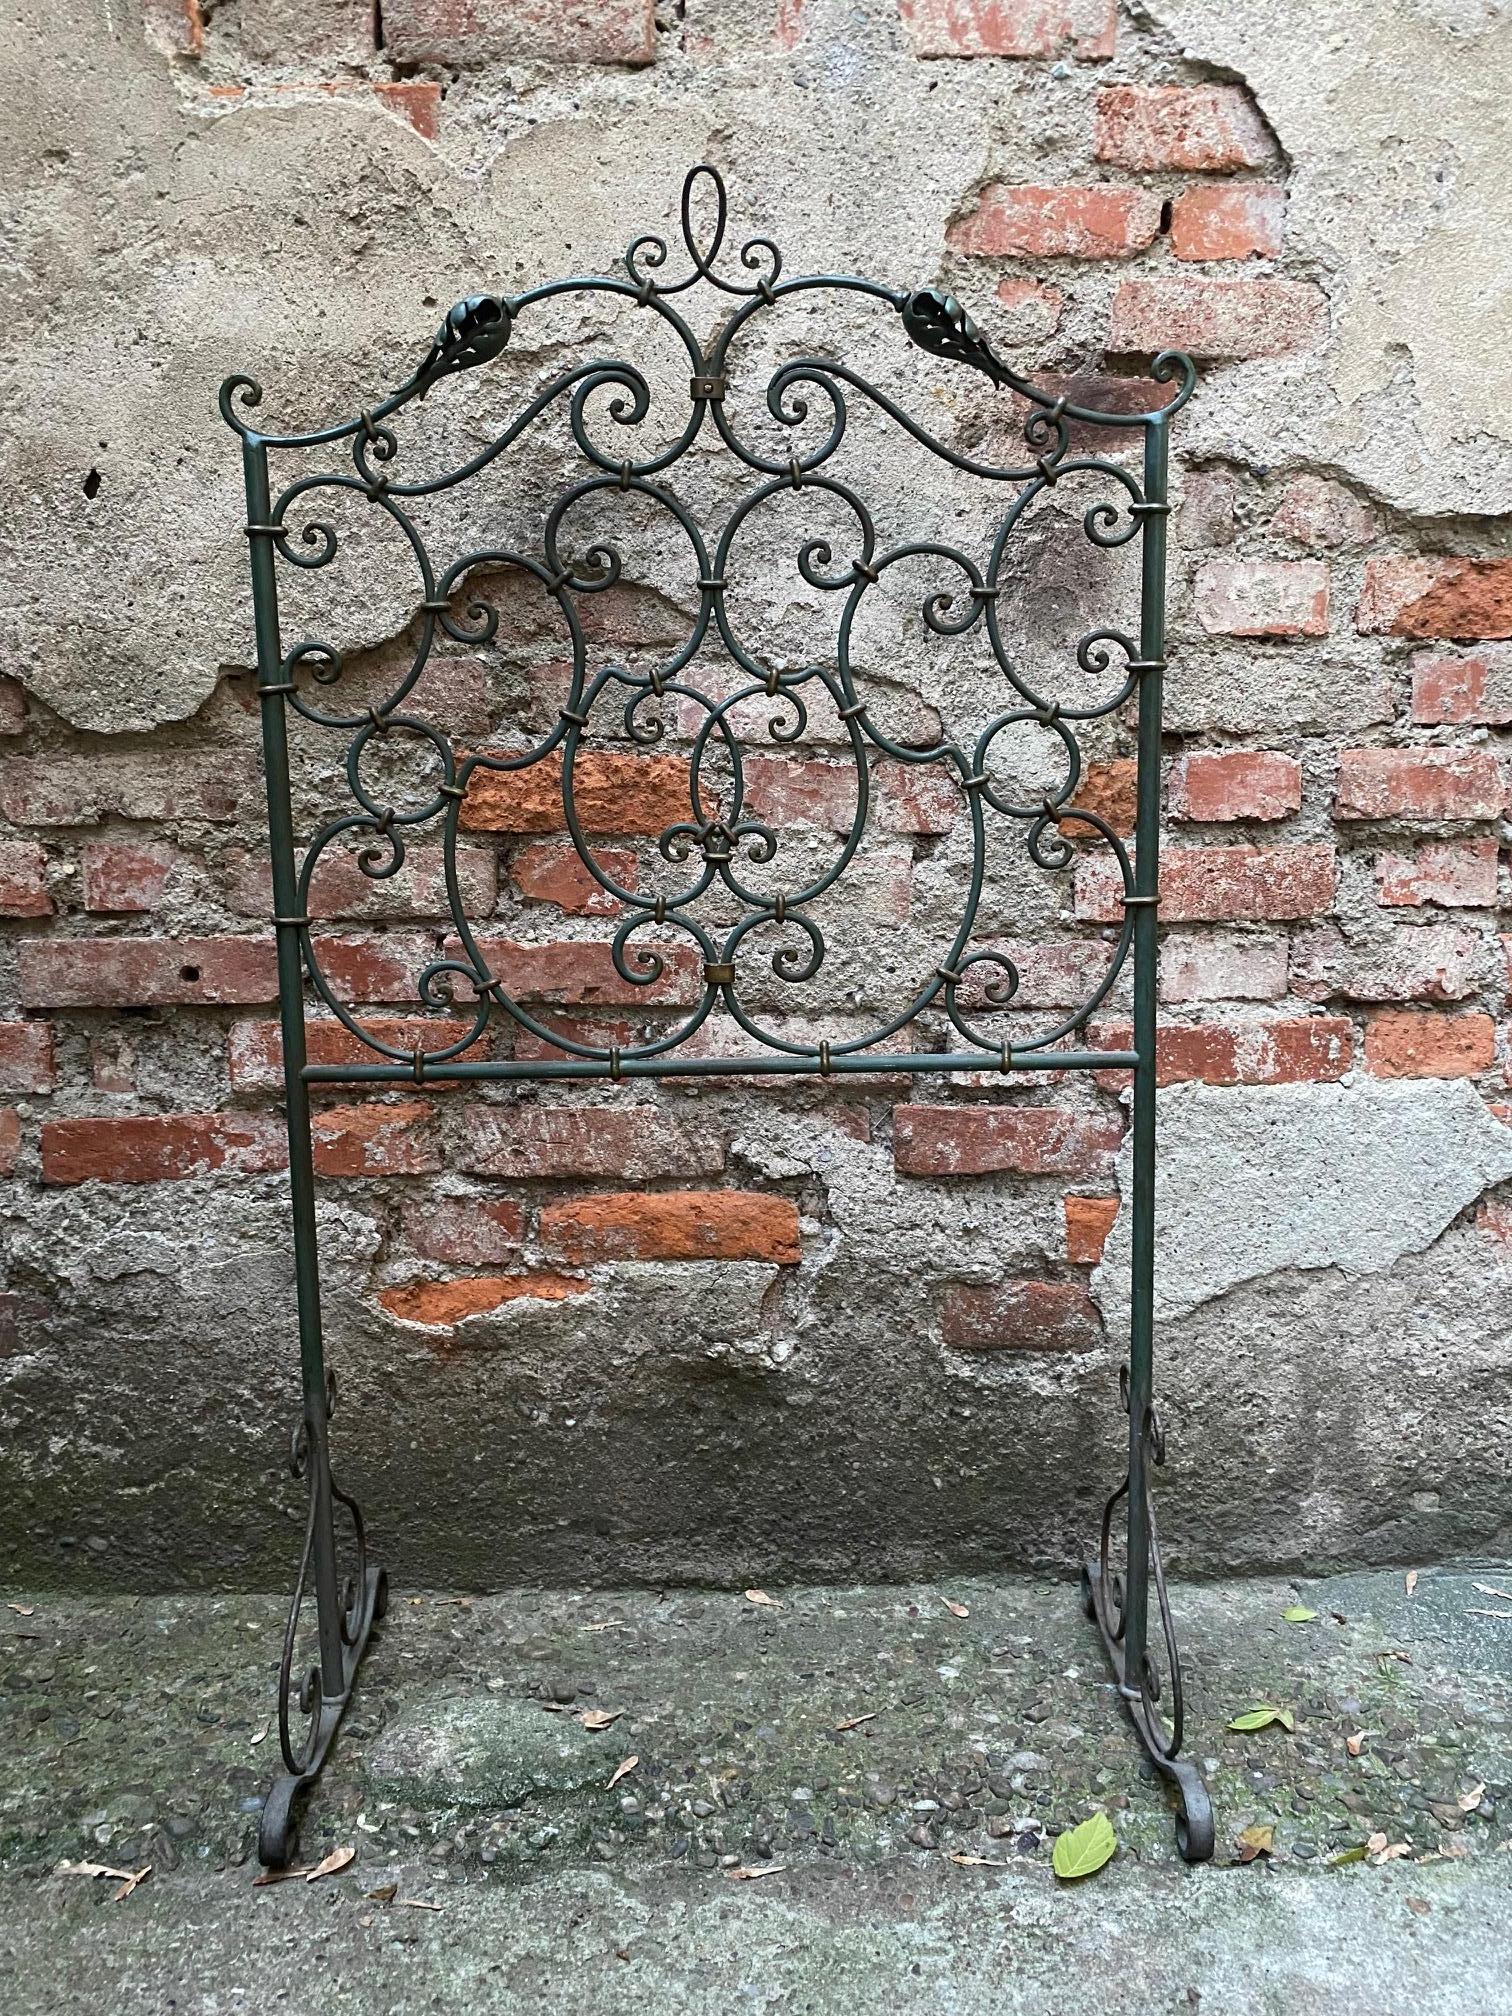 An original wrought iron children's bed headboard handmade in Italy in the early 20th century. It comes from a private collection in Milan and is in good condition, with a delicate lacquer finish in excavated green.

The headboard's curly decoration